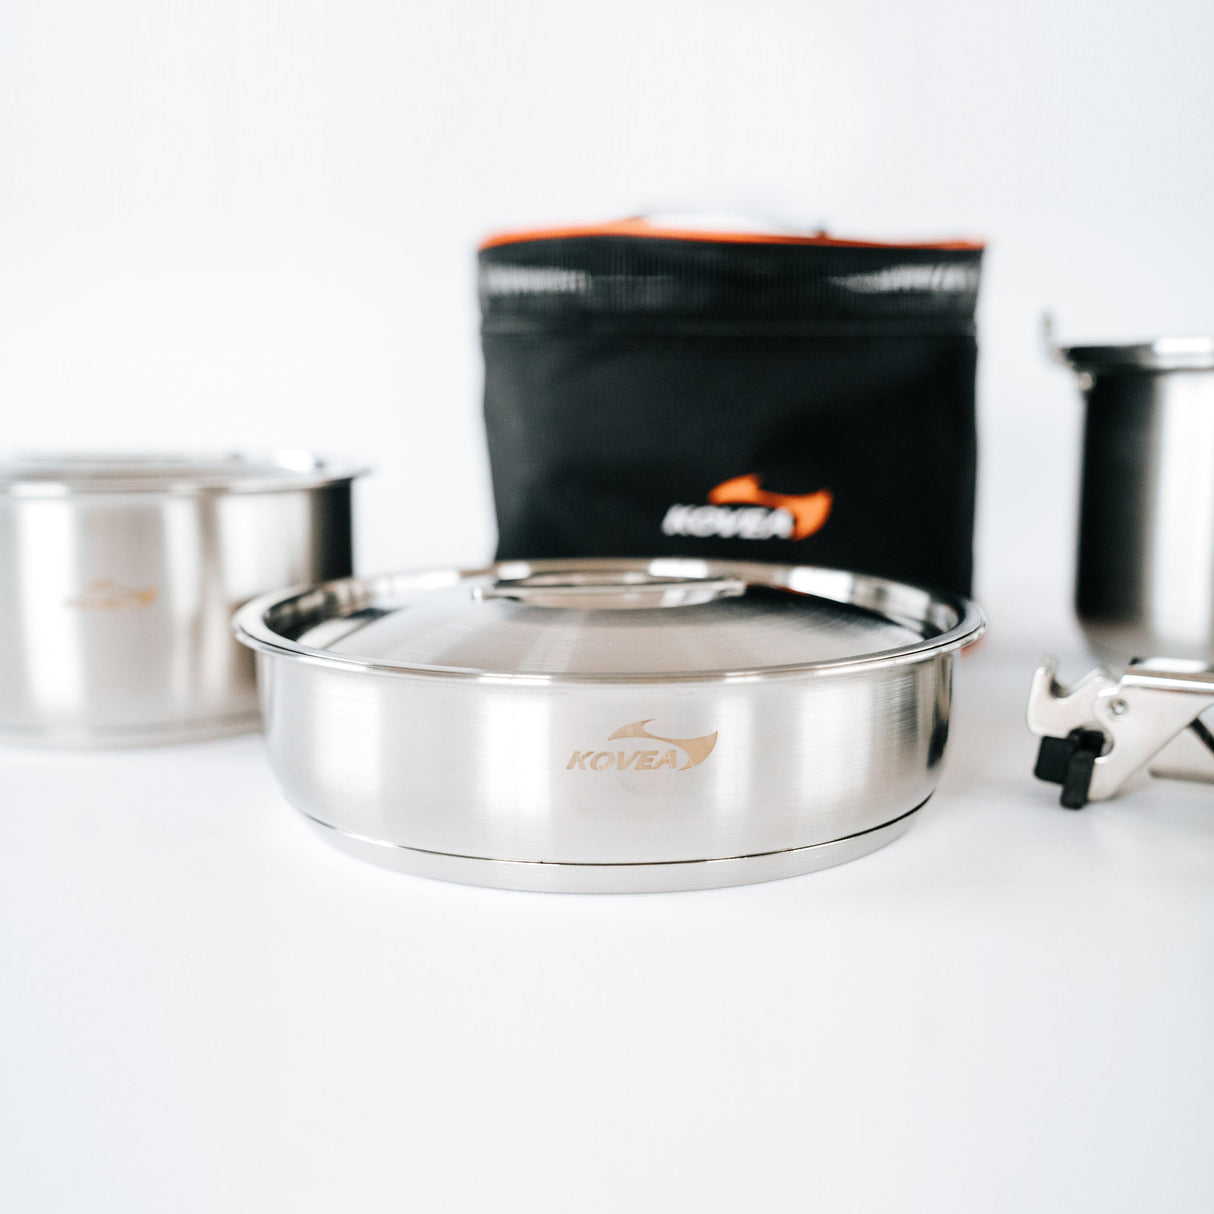 Triple Stainless Cookware L - BaseCamp Provisions